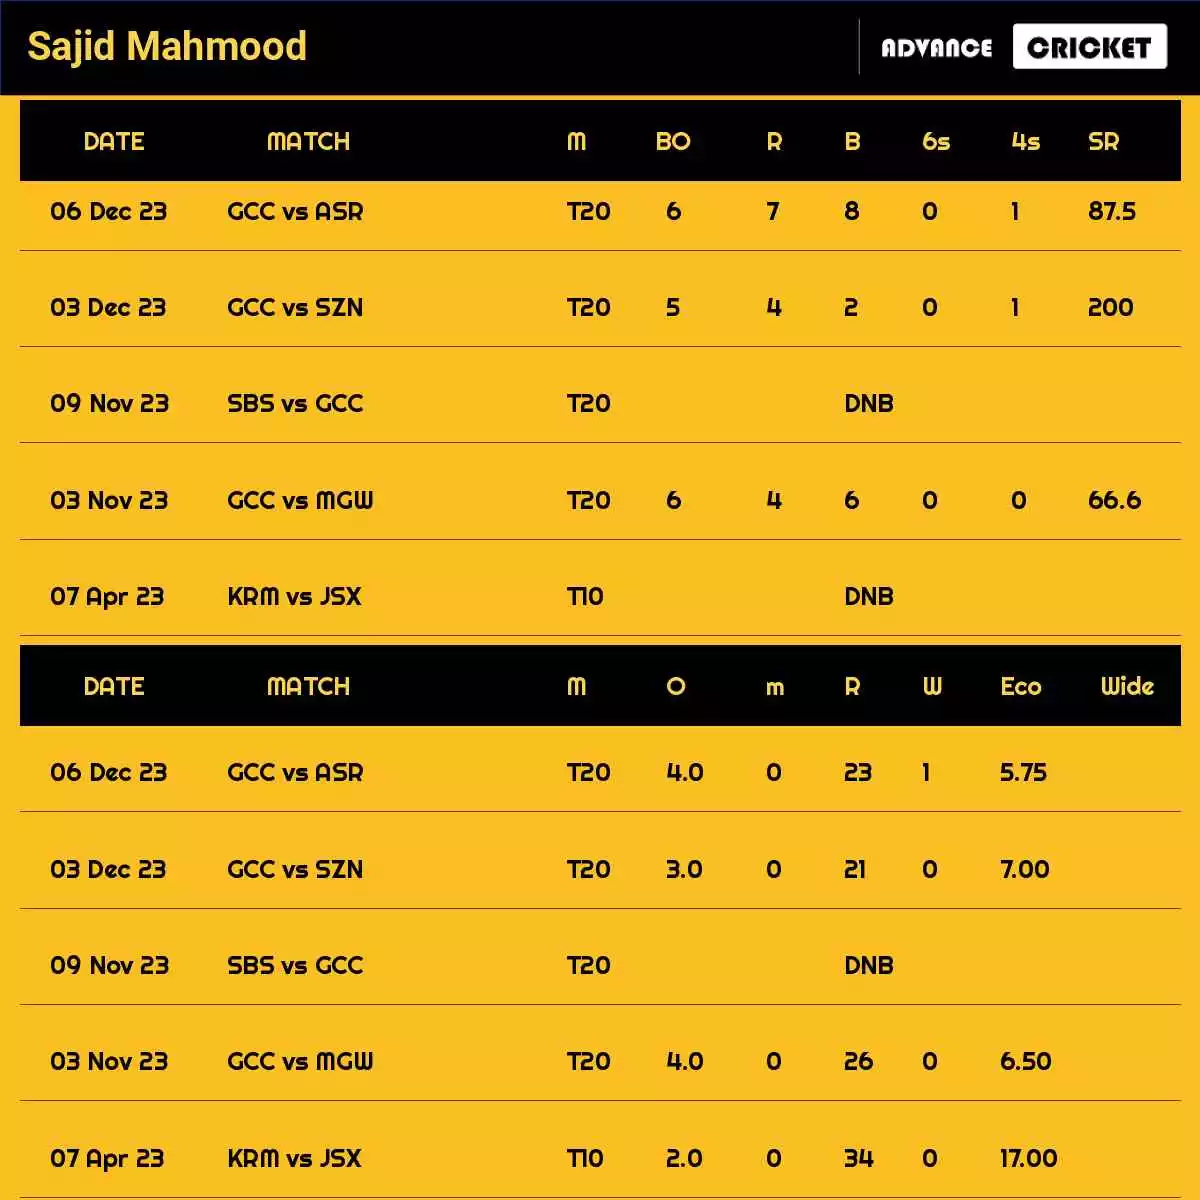 Sajid Mahmood Recent Matches Details Date Wise